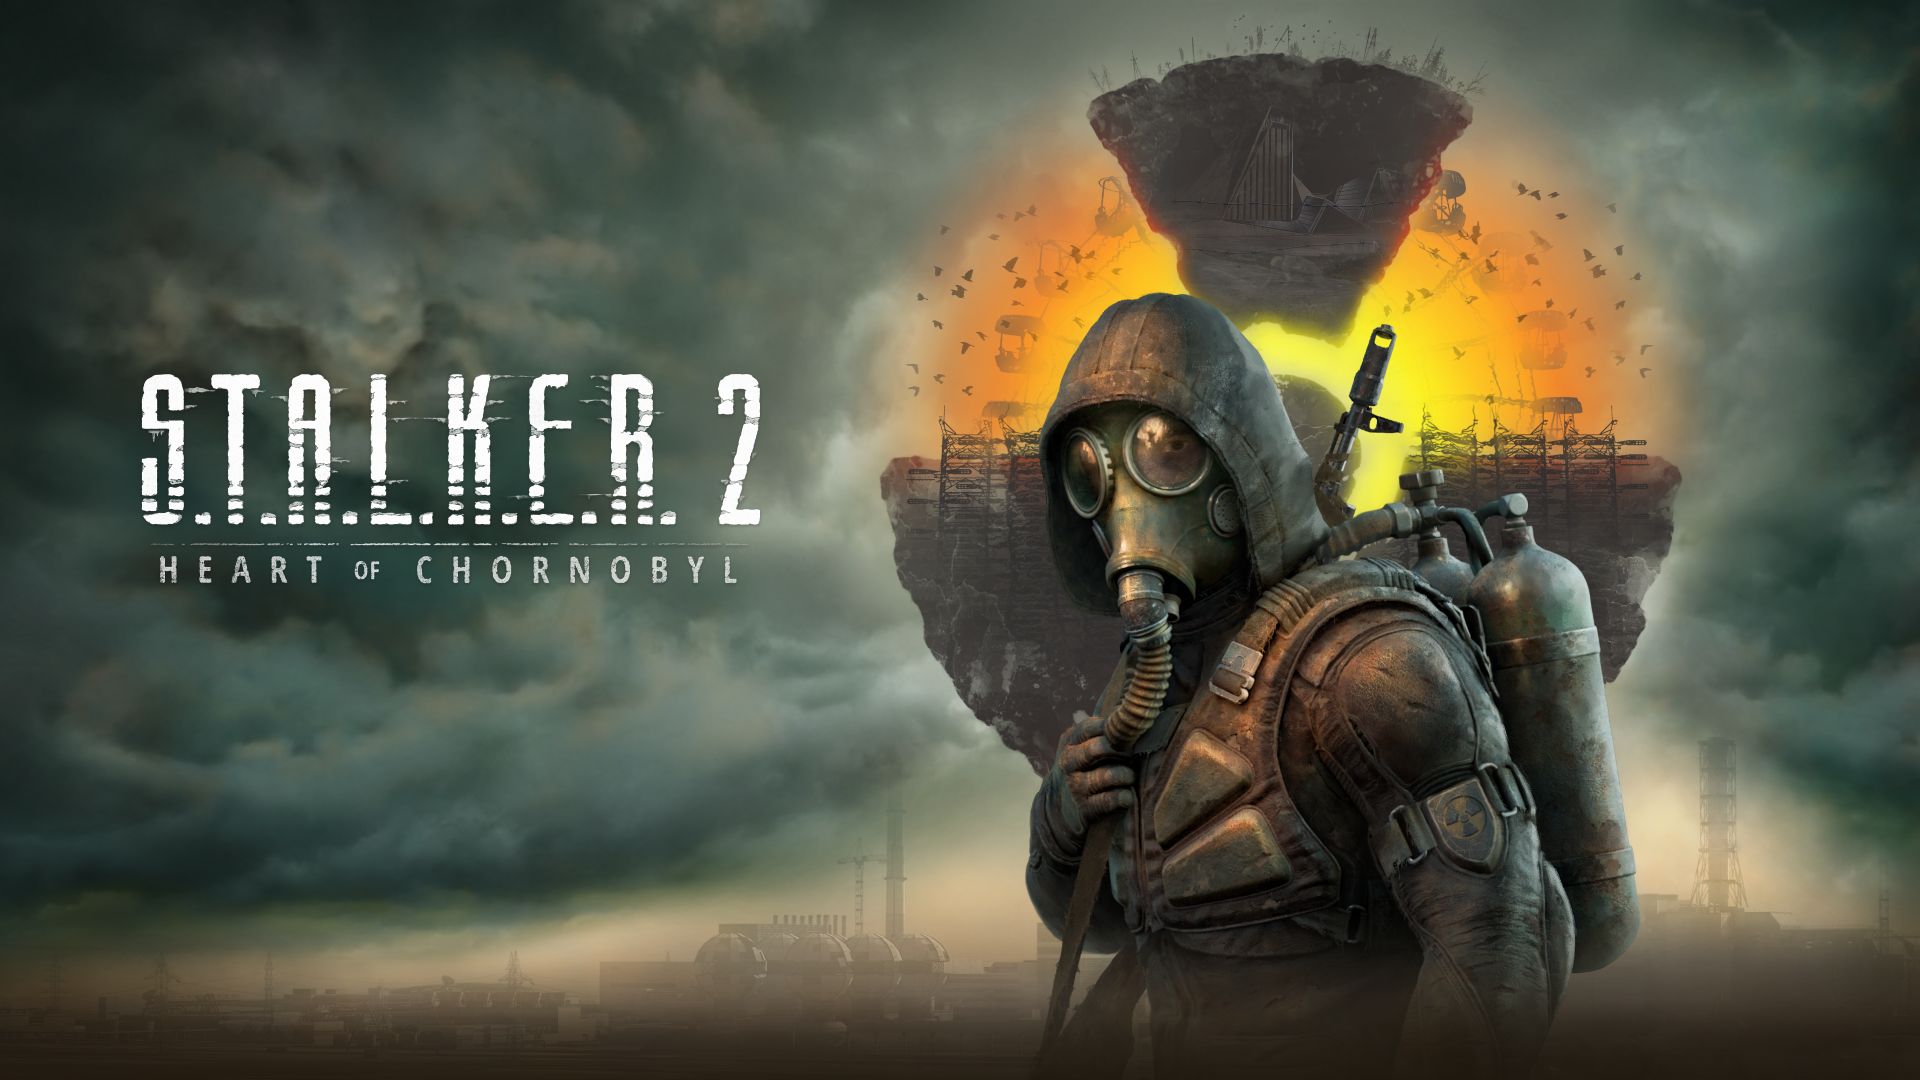 It seems that S.T.A.L.K.E.R. 2: Heart of Chornobyl will be released in the first quarter of 2024